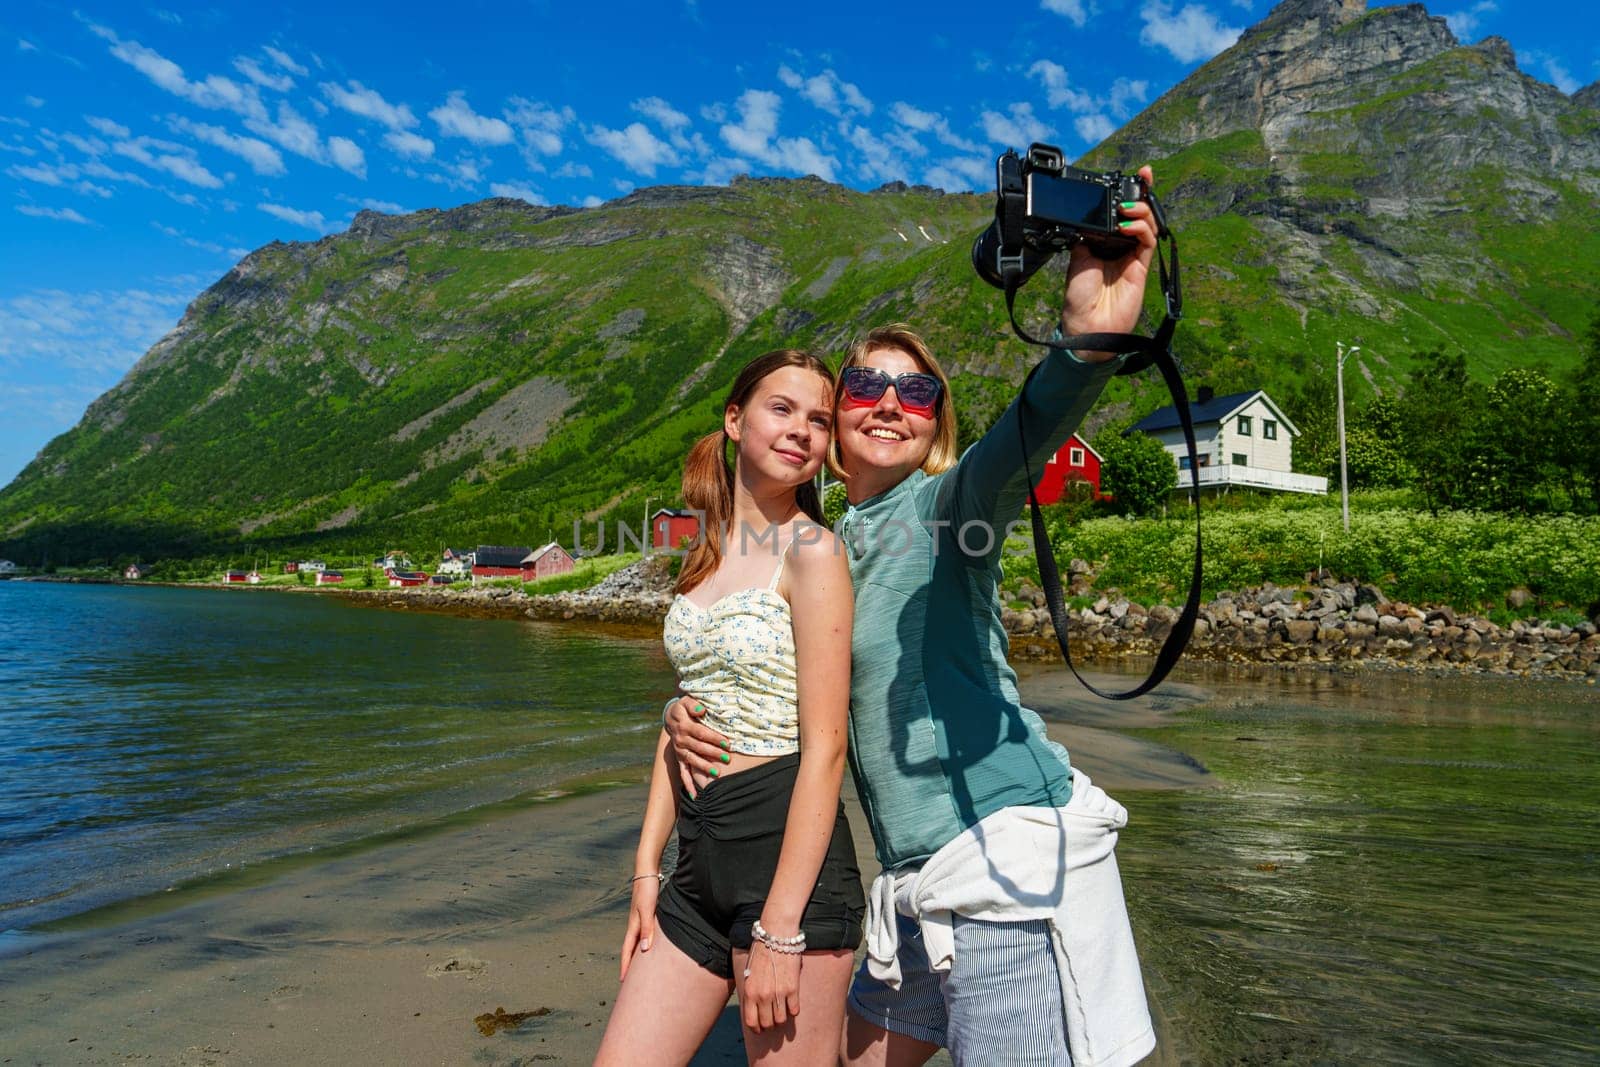 A stylish young woman is seen taking a selfie with a professional camera in an urban setting, showcasing her creativity and passion for photography while enjoying a modern lifestyle.